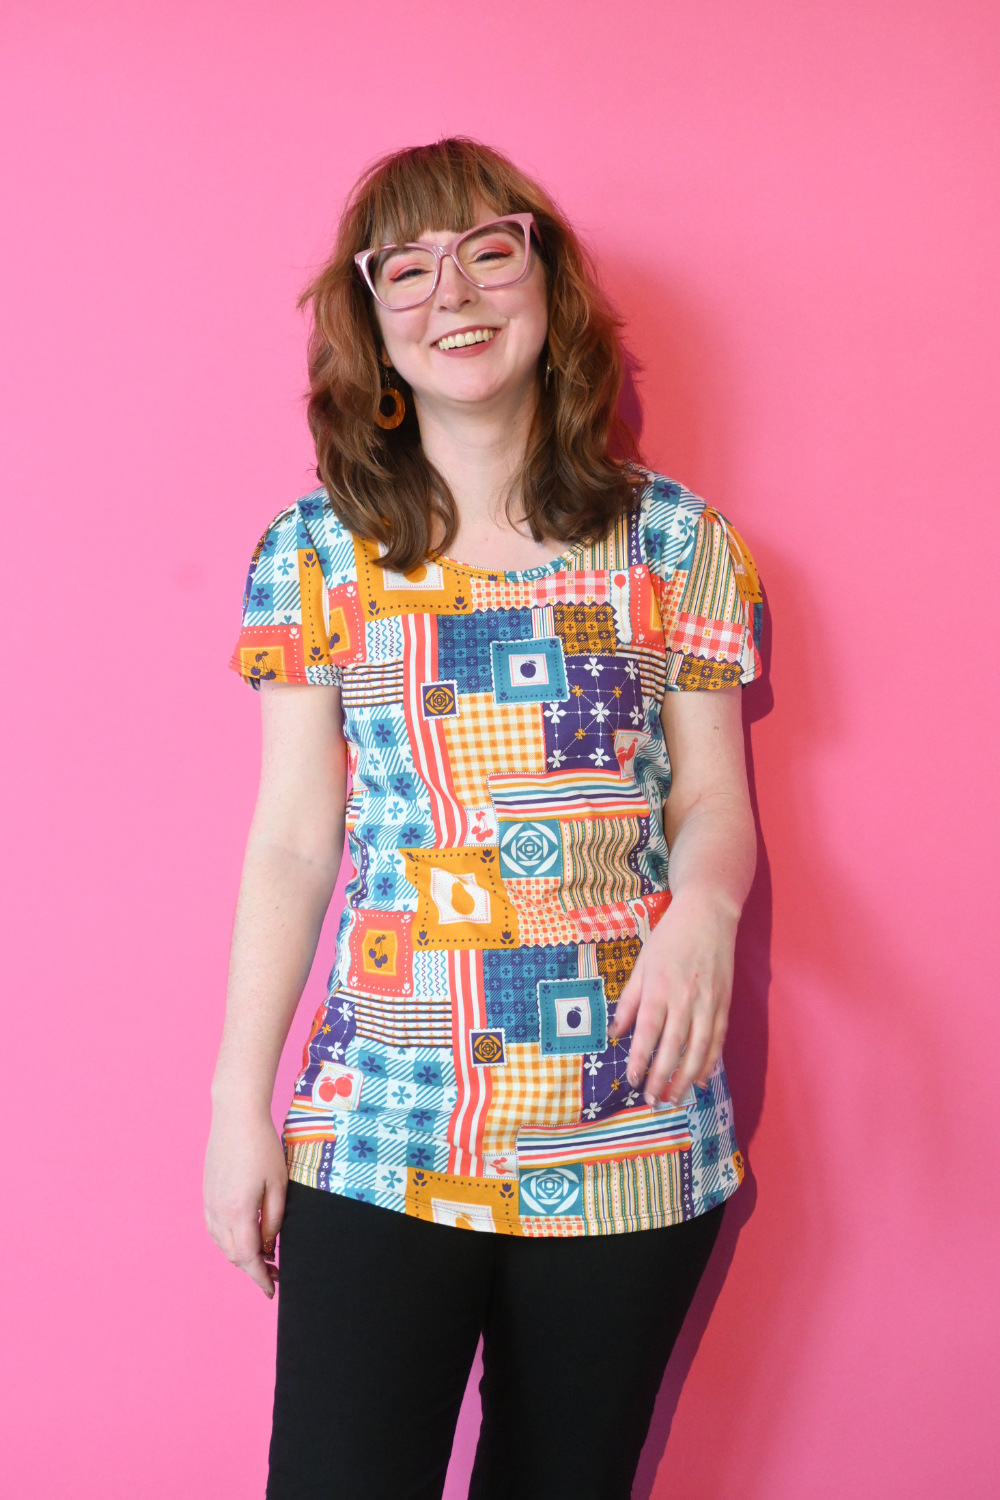 Brown-haired model with glasses wearing patchwork print shirt in primary colors